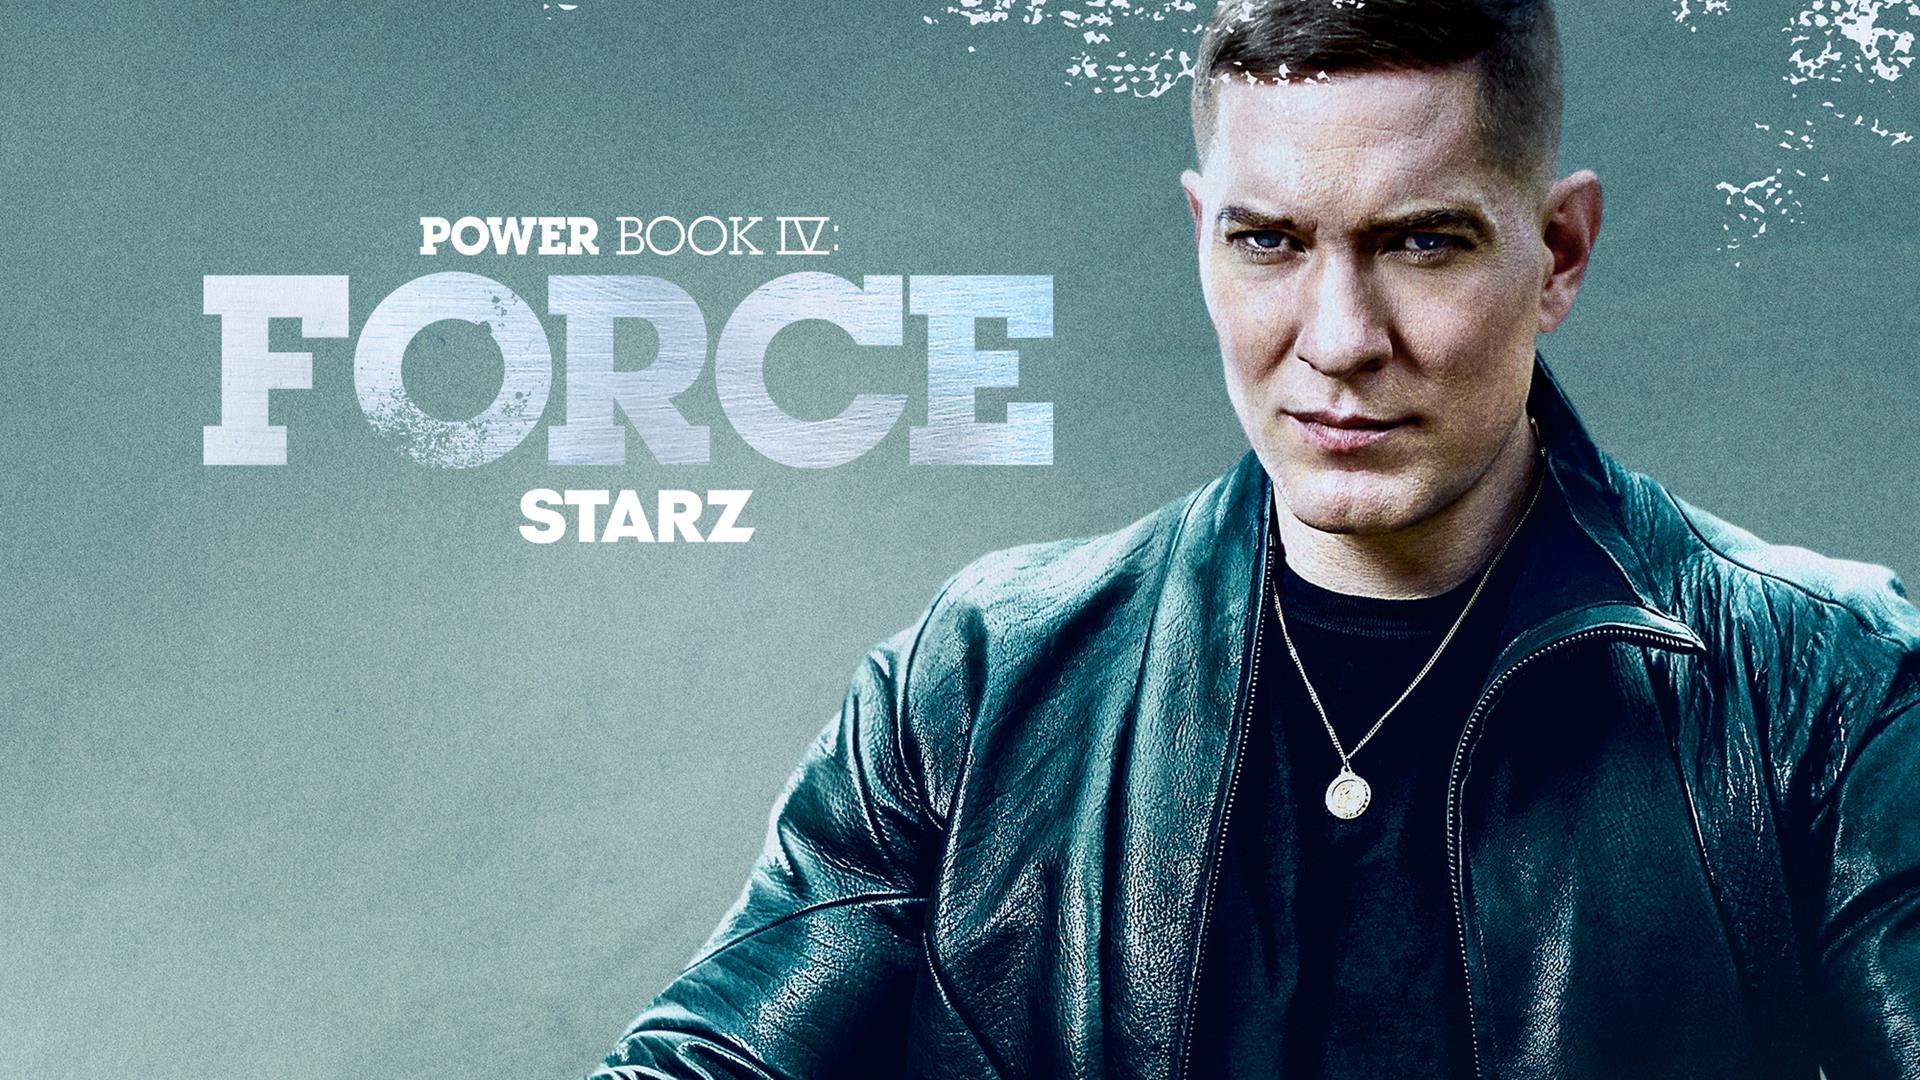 Power Book IV: FORCE